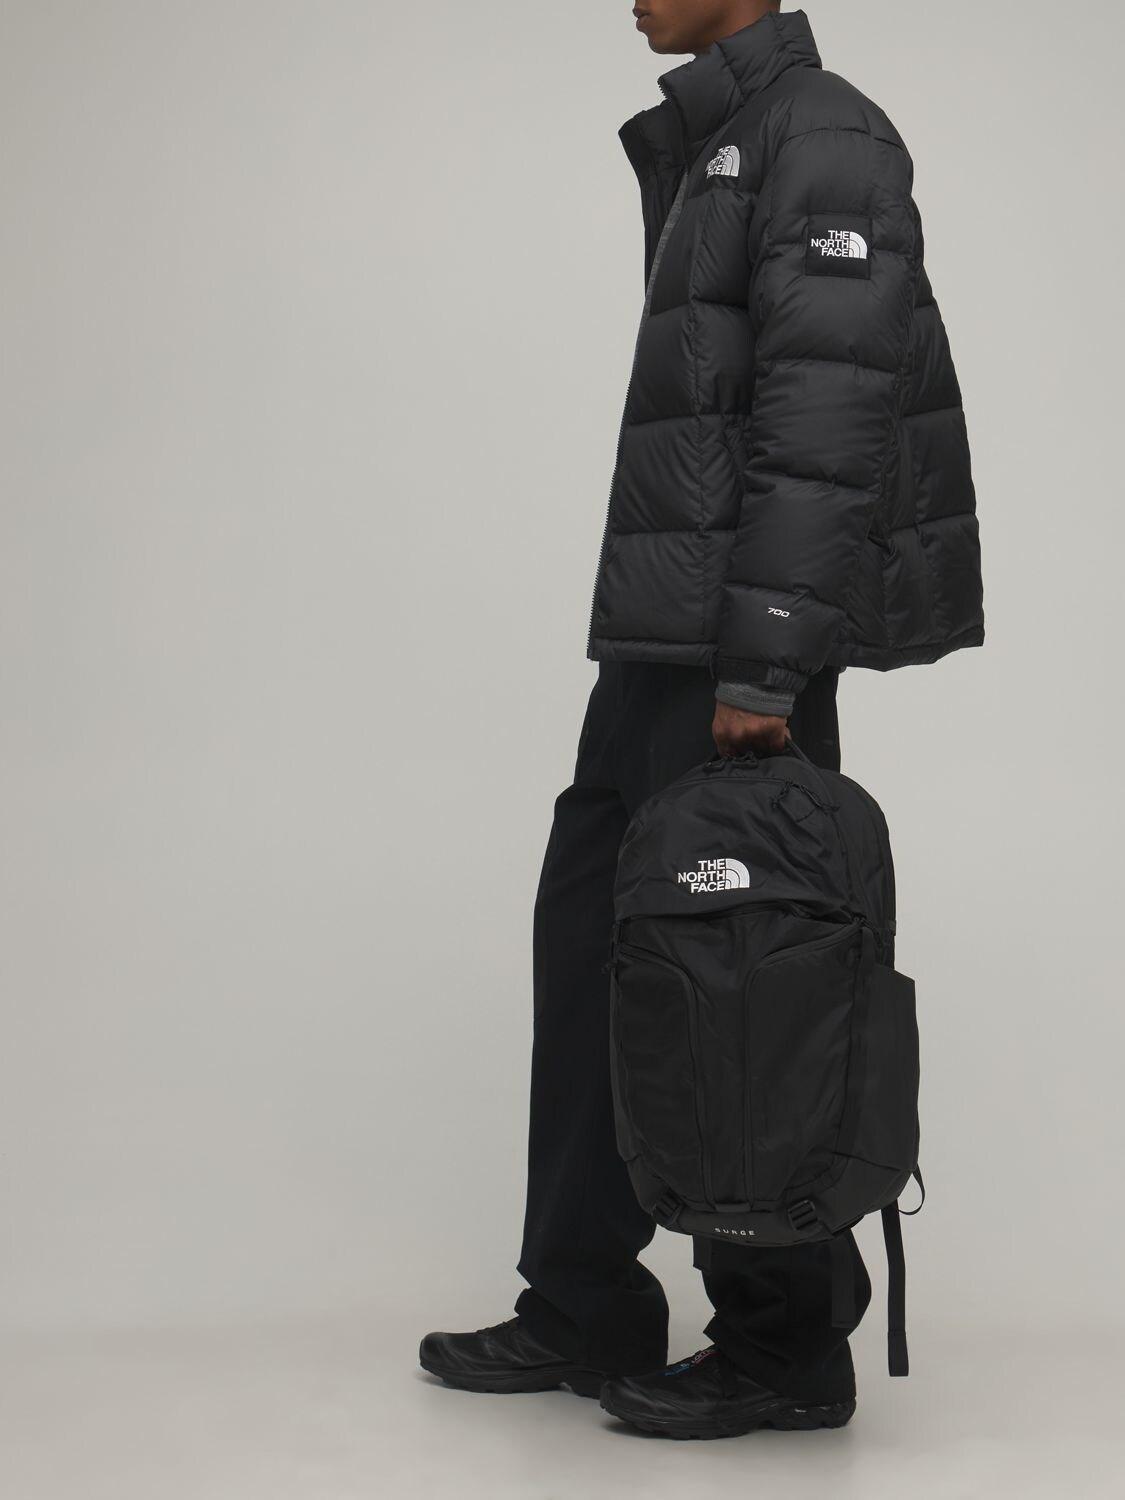 The North Face Synthetic Surge Backpack in Black for Men - Lyst